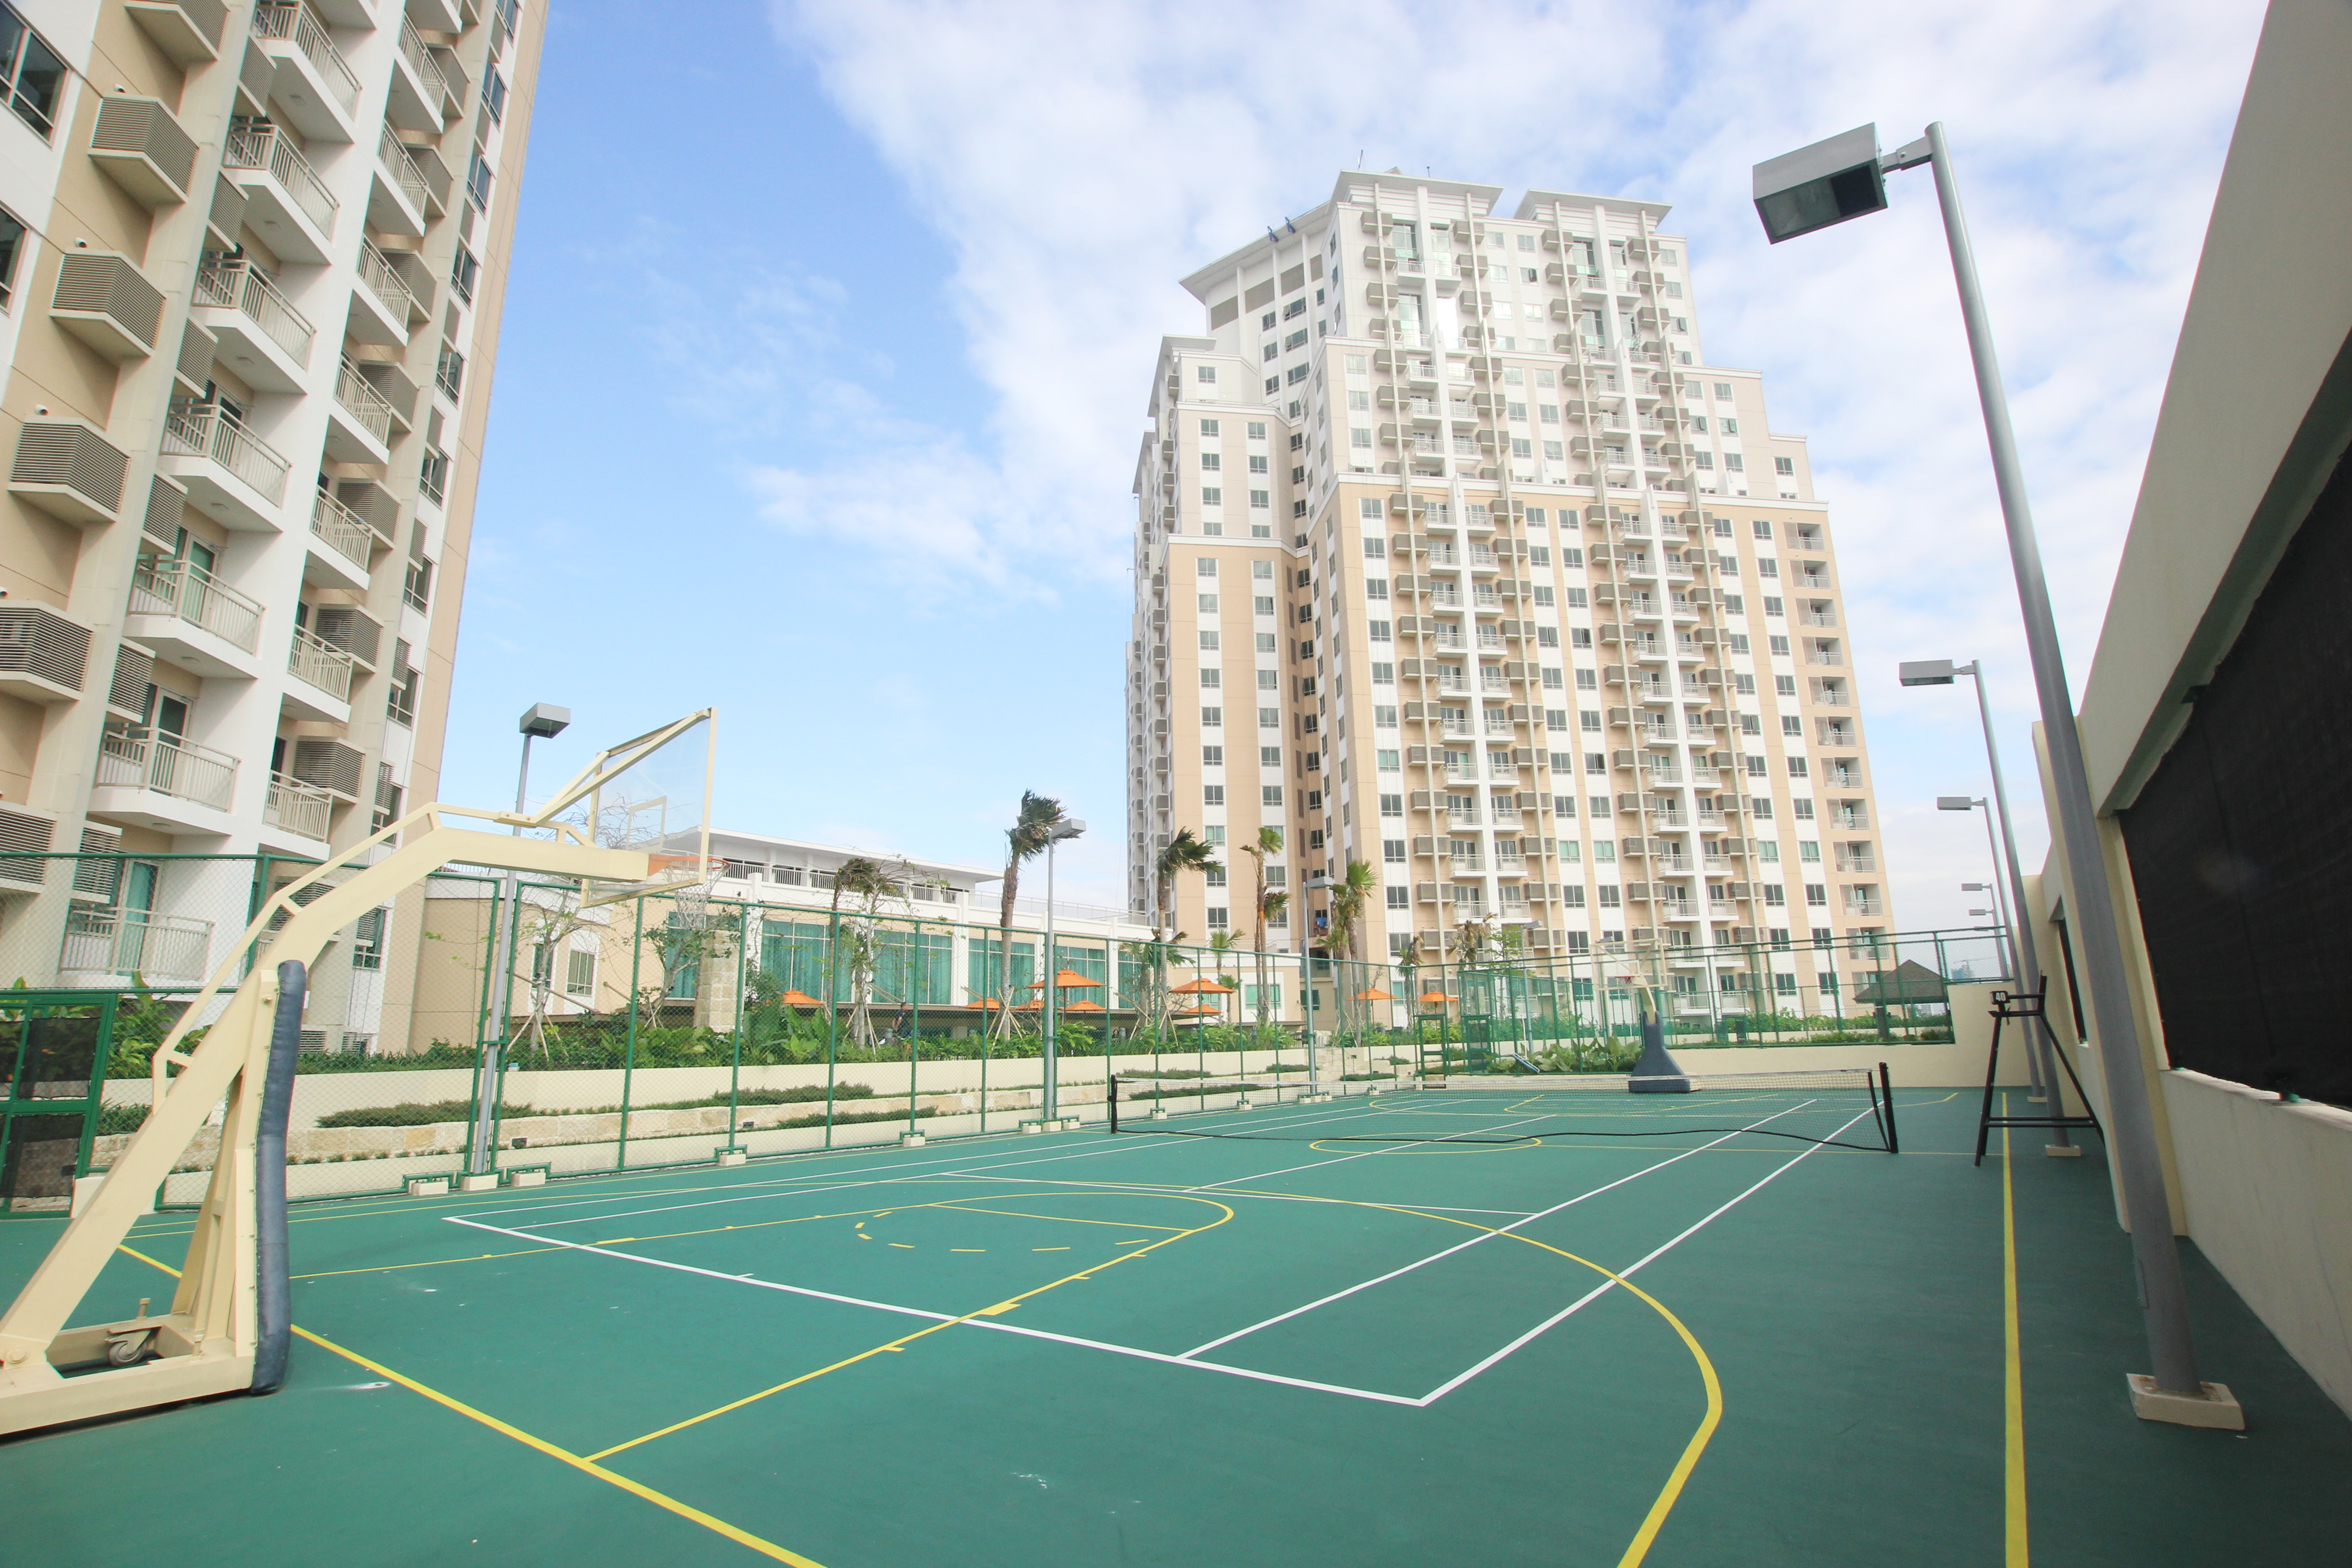 The Grove - Outdoor Court